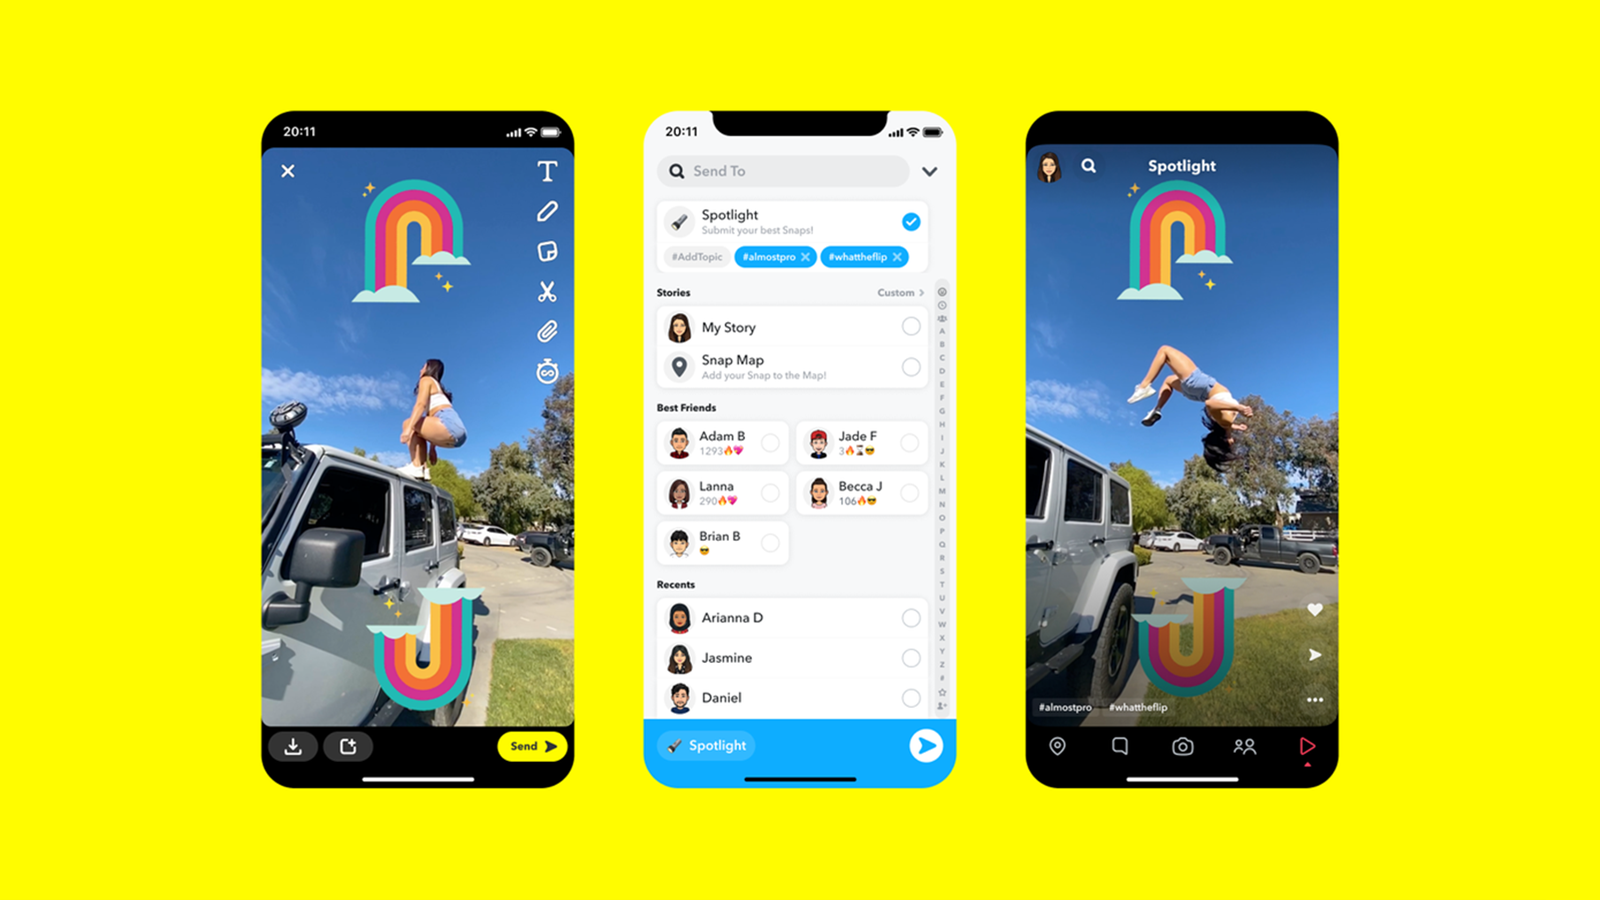 Snapchat’s Unusual Highlight Characteristic Mirror’s TikTok and Pays Some Creators